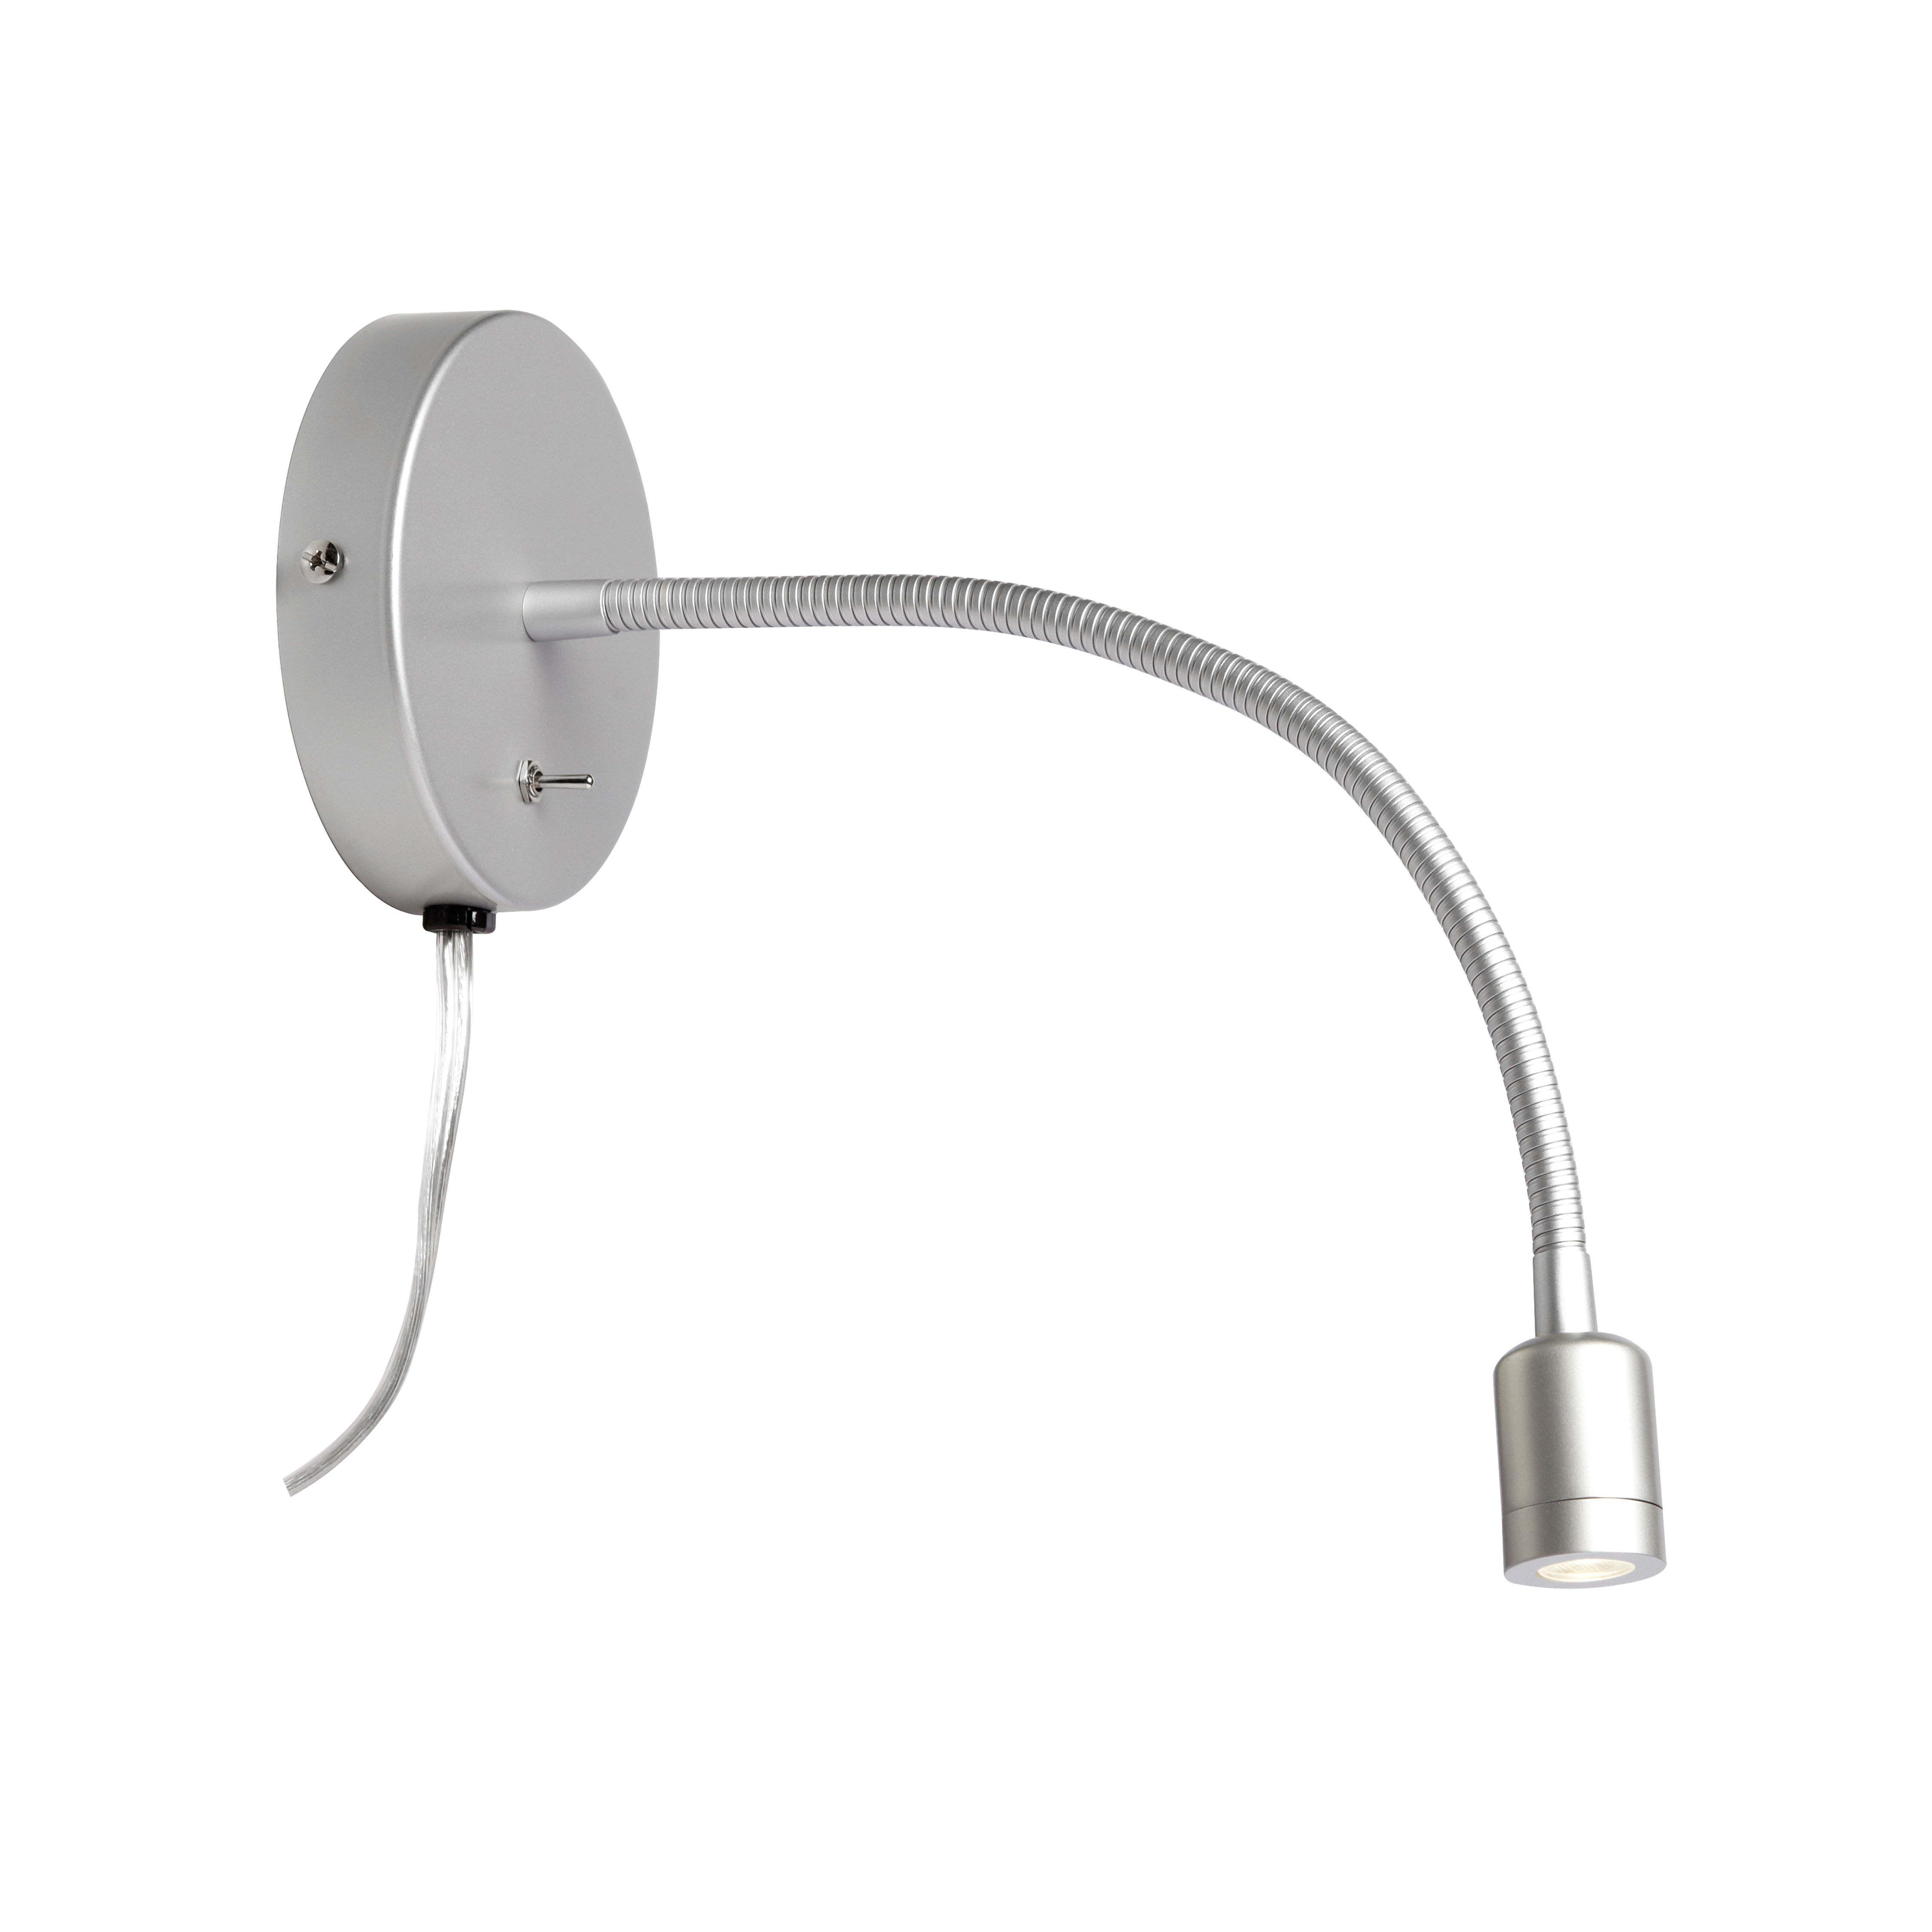 Wynne lighting features a brilliantly simple concept that works both functionally and fashionably, as it adds a pop of modern edge to the room. The design features an LED light. LED fixtures produce light at up to 90 percent better efficiency than incandescent lighting. The circular metal frame is wall-mounted, with a gooseneck arm curved downward to house an LED light. Available in a variety of finishes, it's an elegant look with a discrete profile. Practical and stylish, Wynne lighting adds welcome directional light to a bedroom or office space, and works well even in irregular areas.